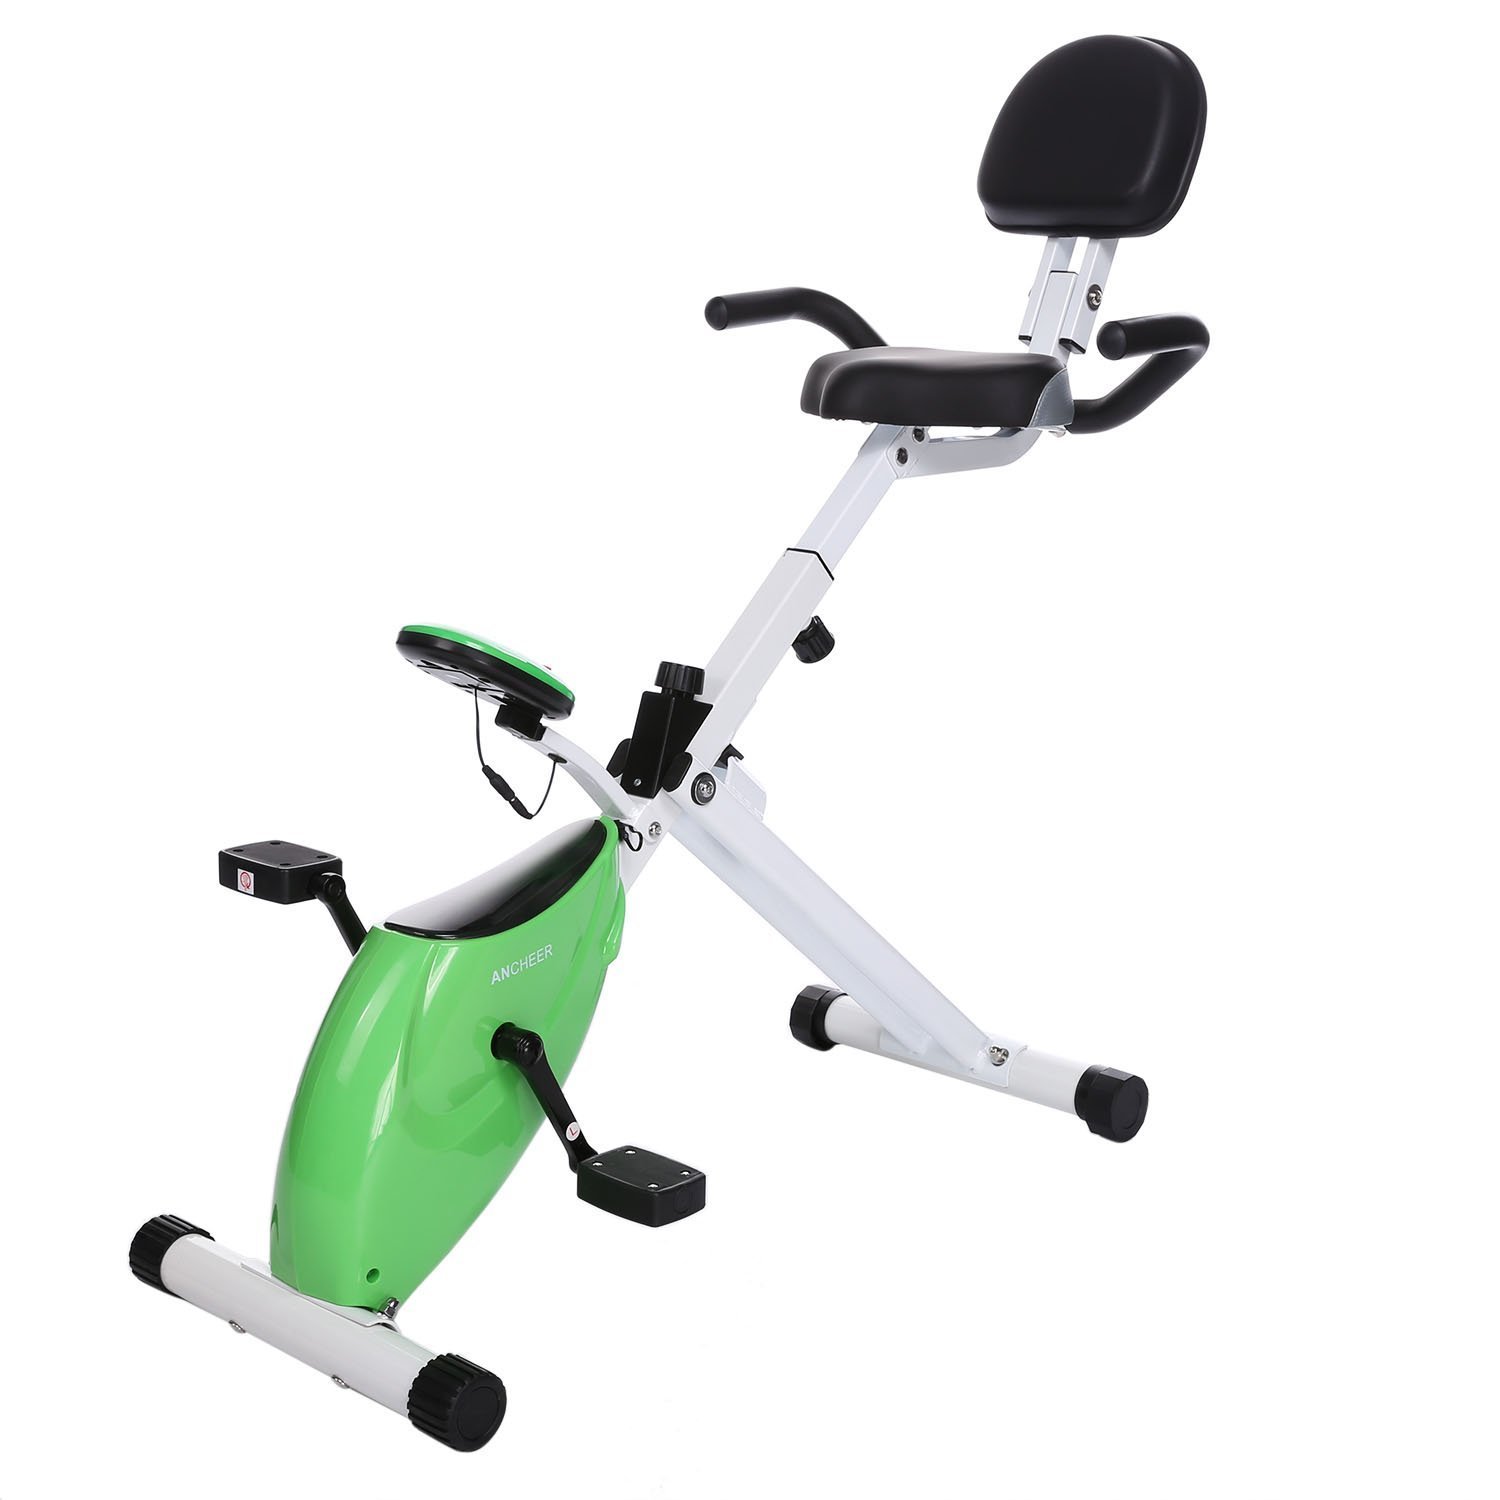 Ancheer Folding Recumbent Exercise Bike's features on full display